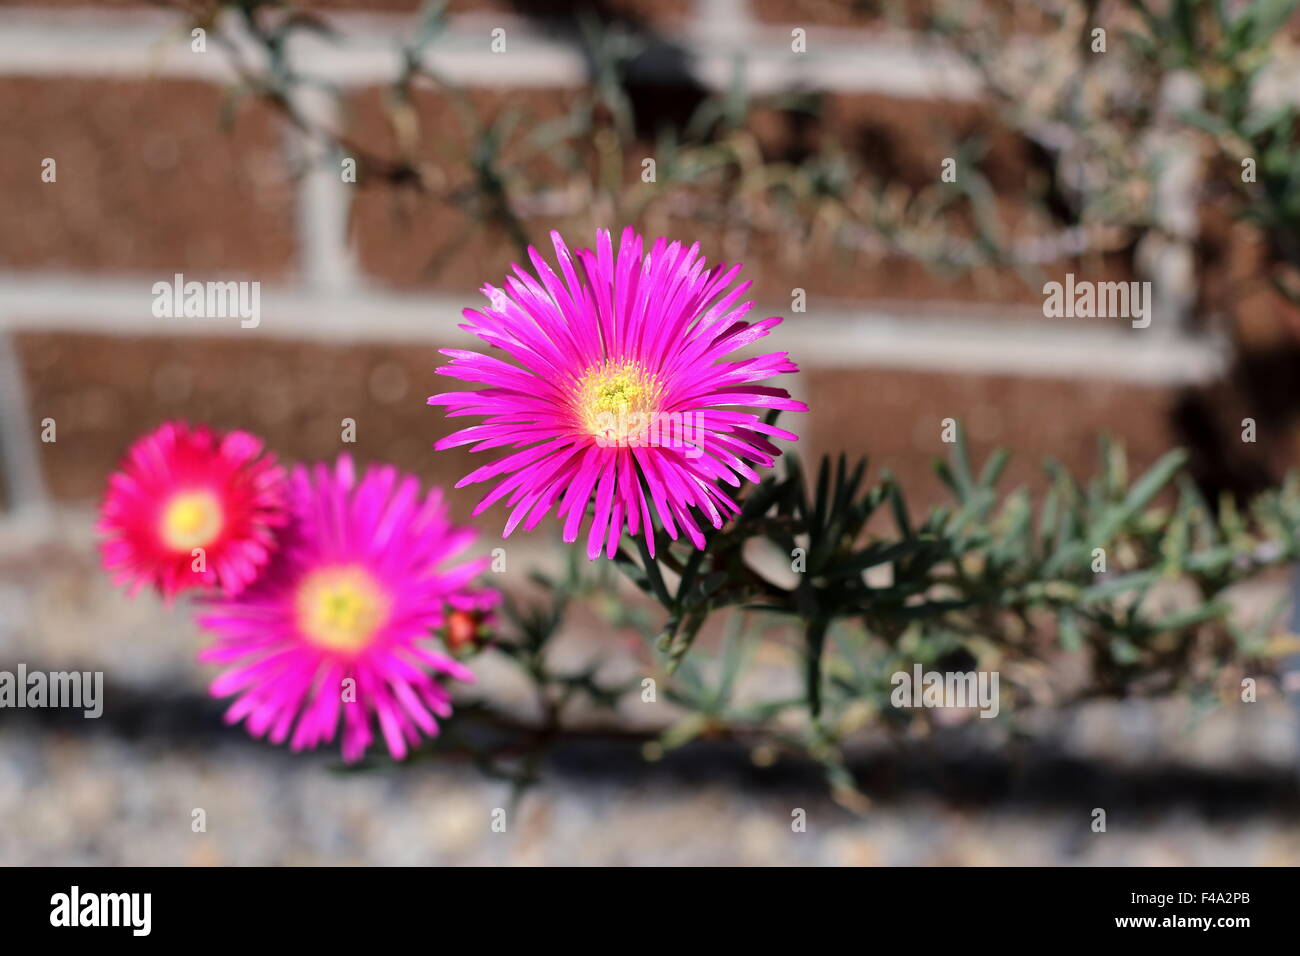 Pink Pig face flowers or Mesembryanthemum , ice plant flowers, Livingstone Daisies in full bloom Stock Photo